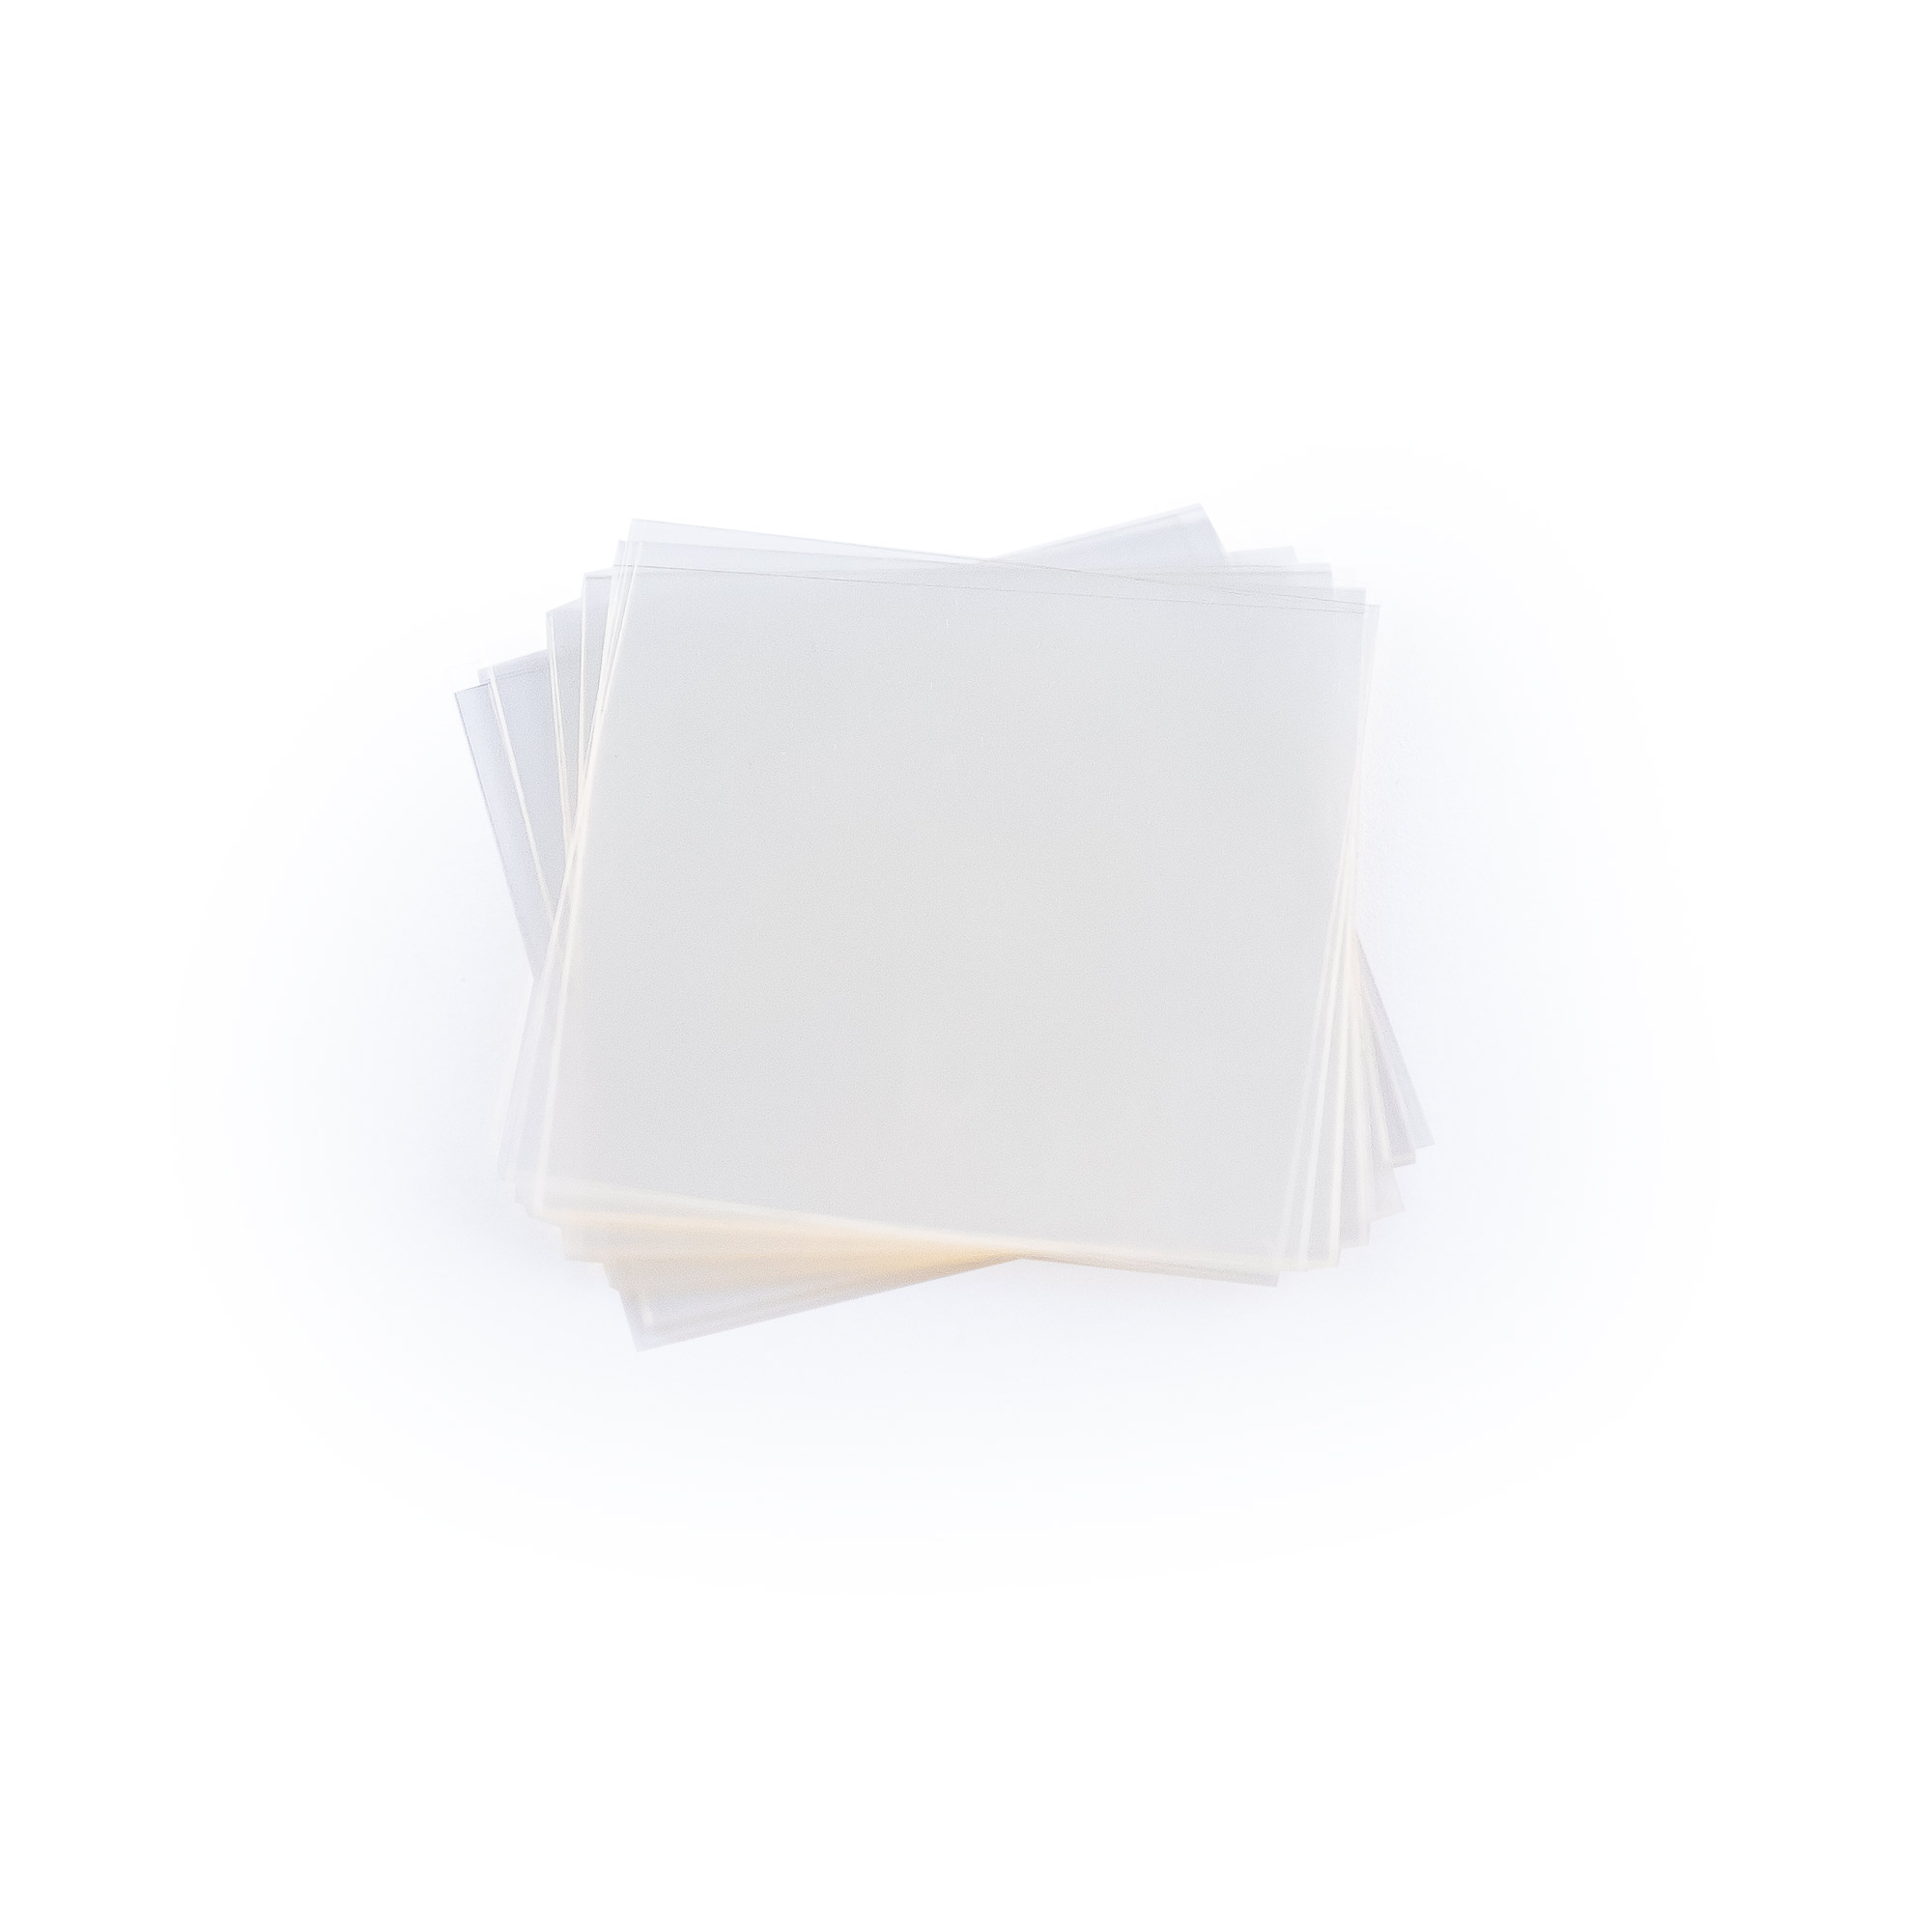 Two sheets 5/16 x 5 x 12 Float Glass and 7 Sheets 3M™ PSA Lapping Film —  Taylor Toolworks